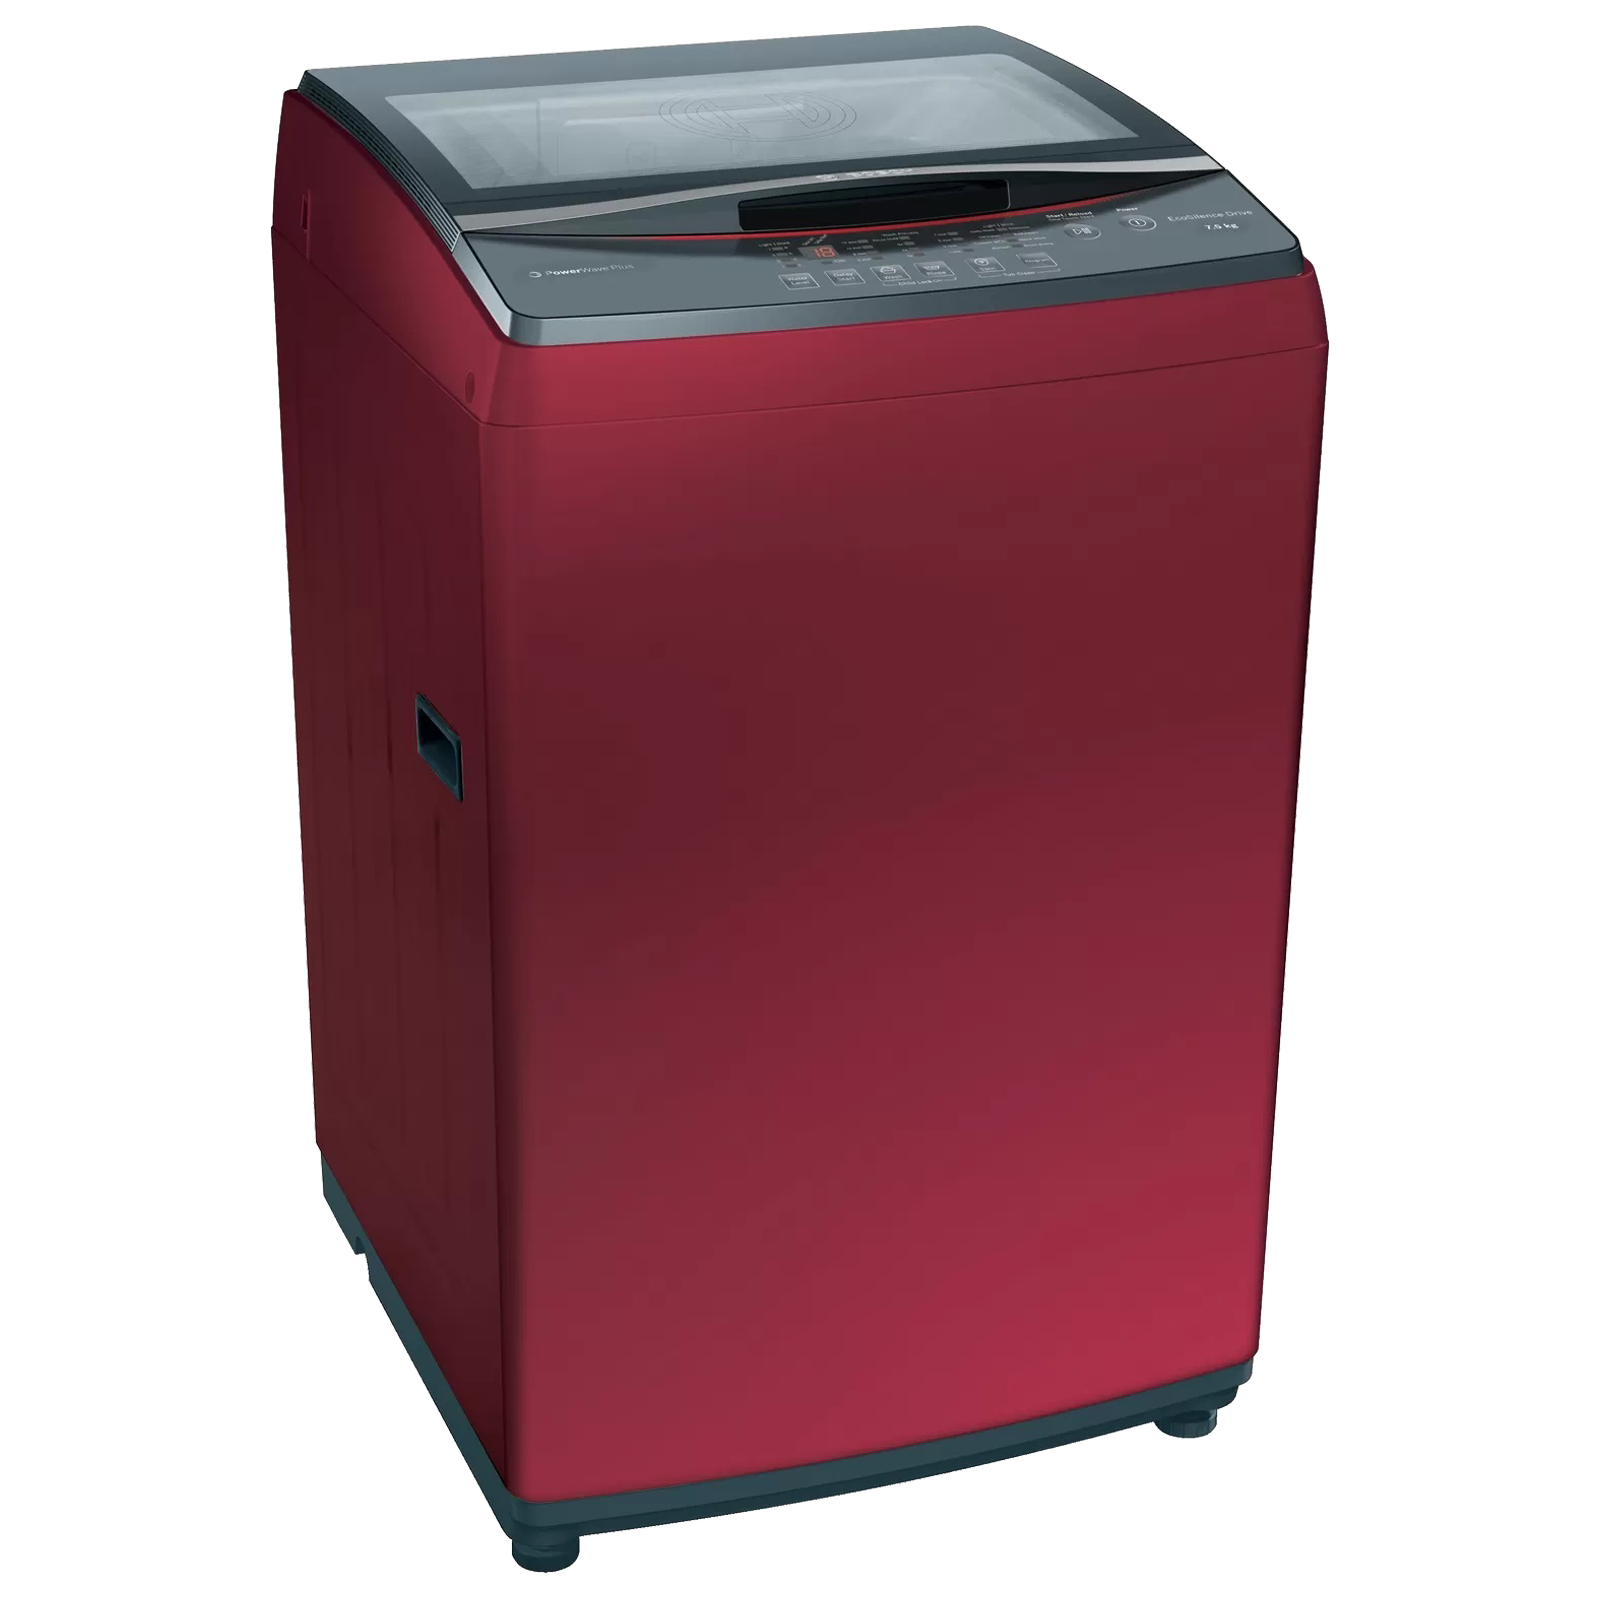 Bosch Serie 4 7.5 kg 5 Star Fully Automatic Top Load Washing Machine (Multiple Water Protection, WOE754C1IN, Metallic Red)_1